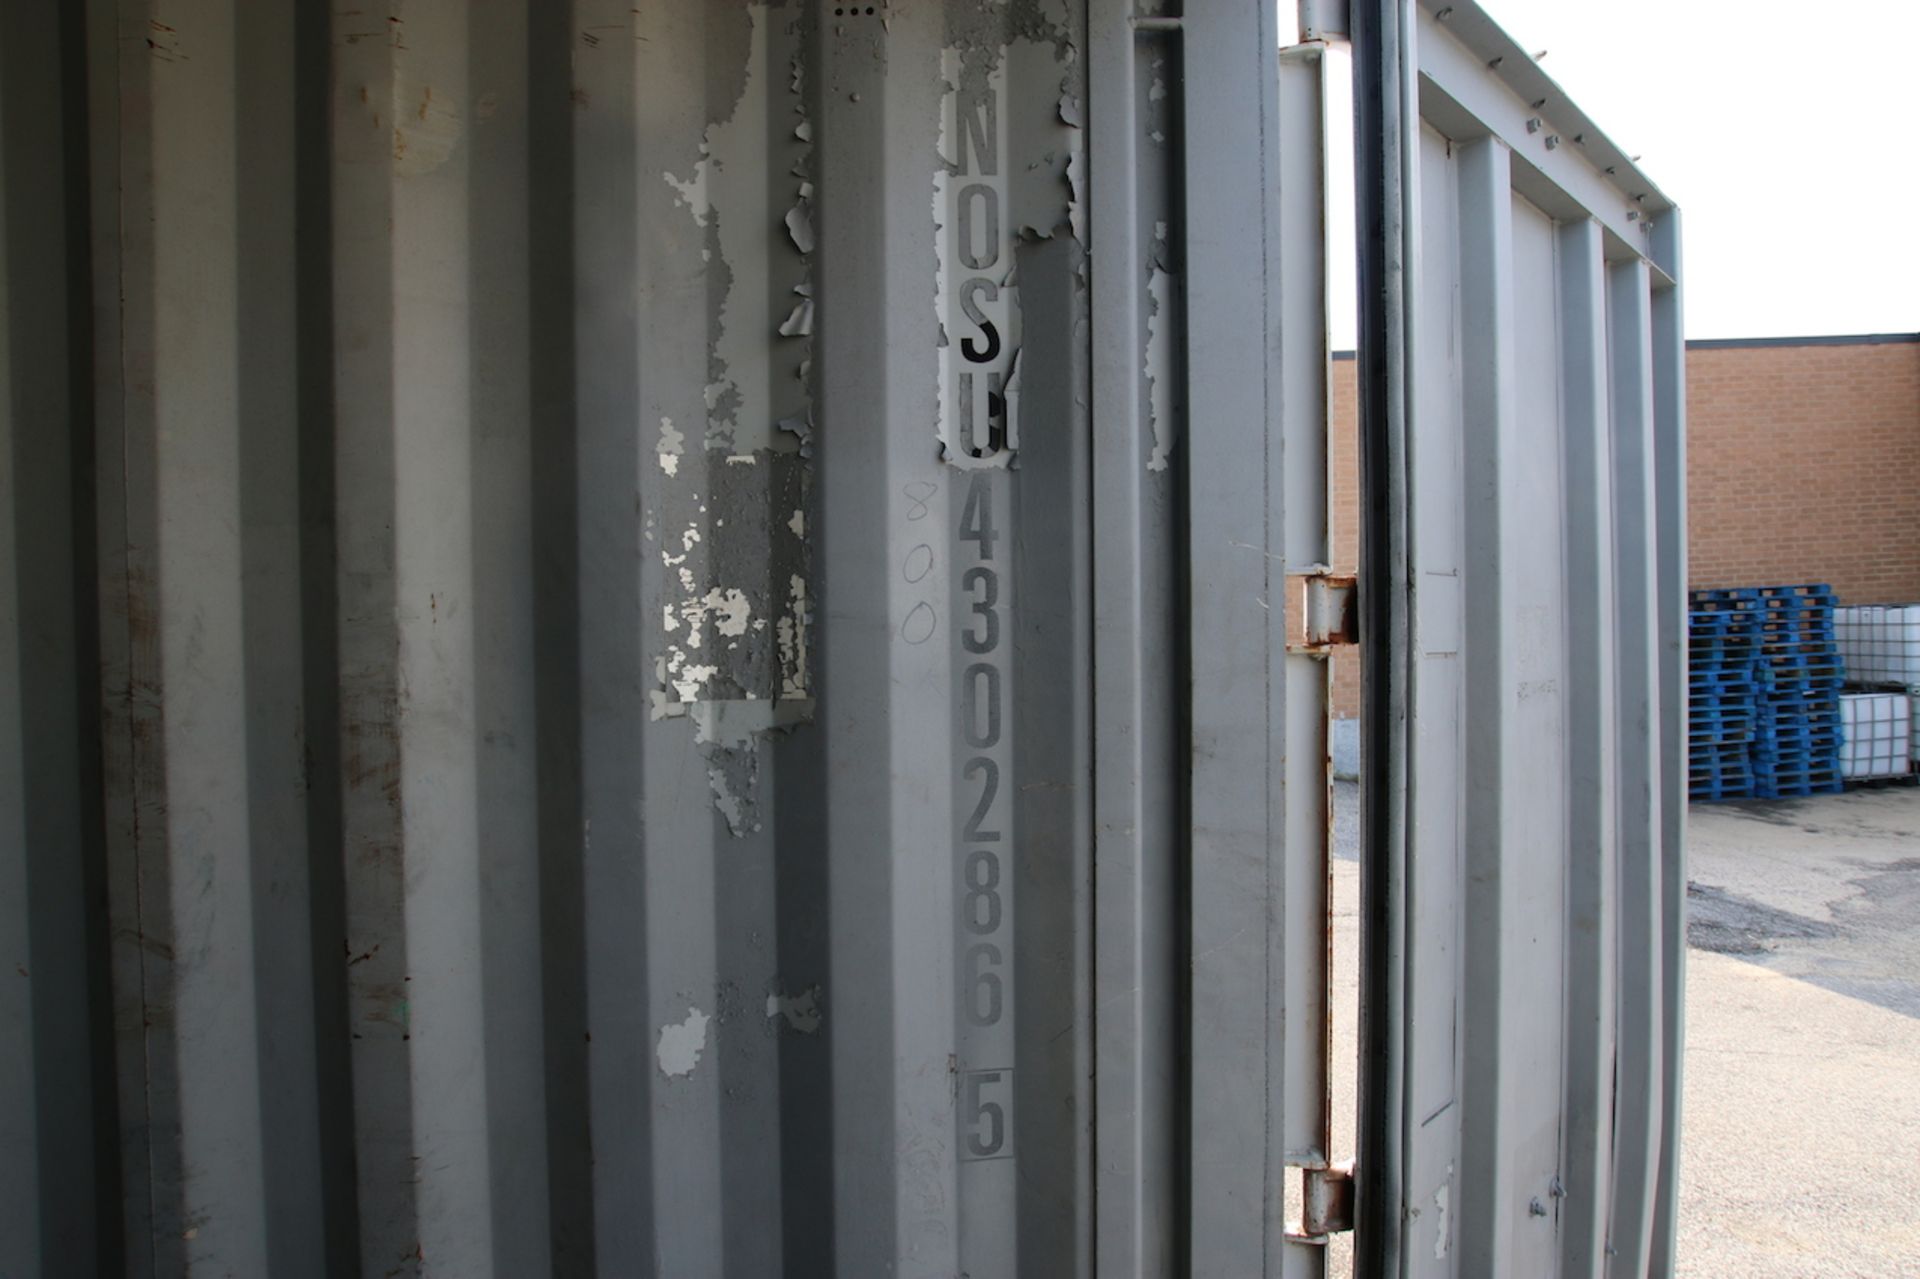 International Cargo Shipping Container, Dims.: 38'5" L x 8' W x 7'10" H - Image 4 of 5